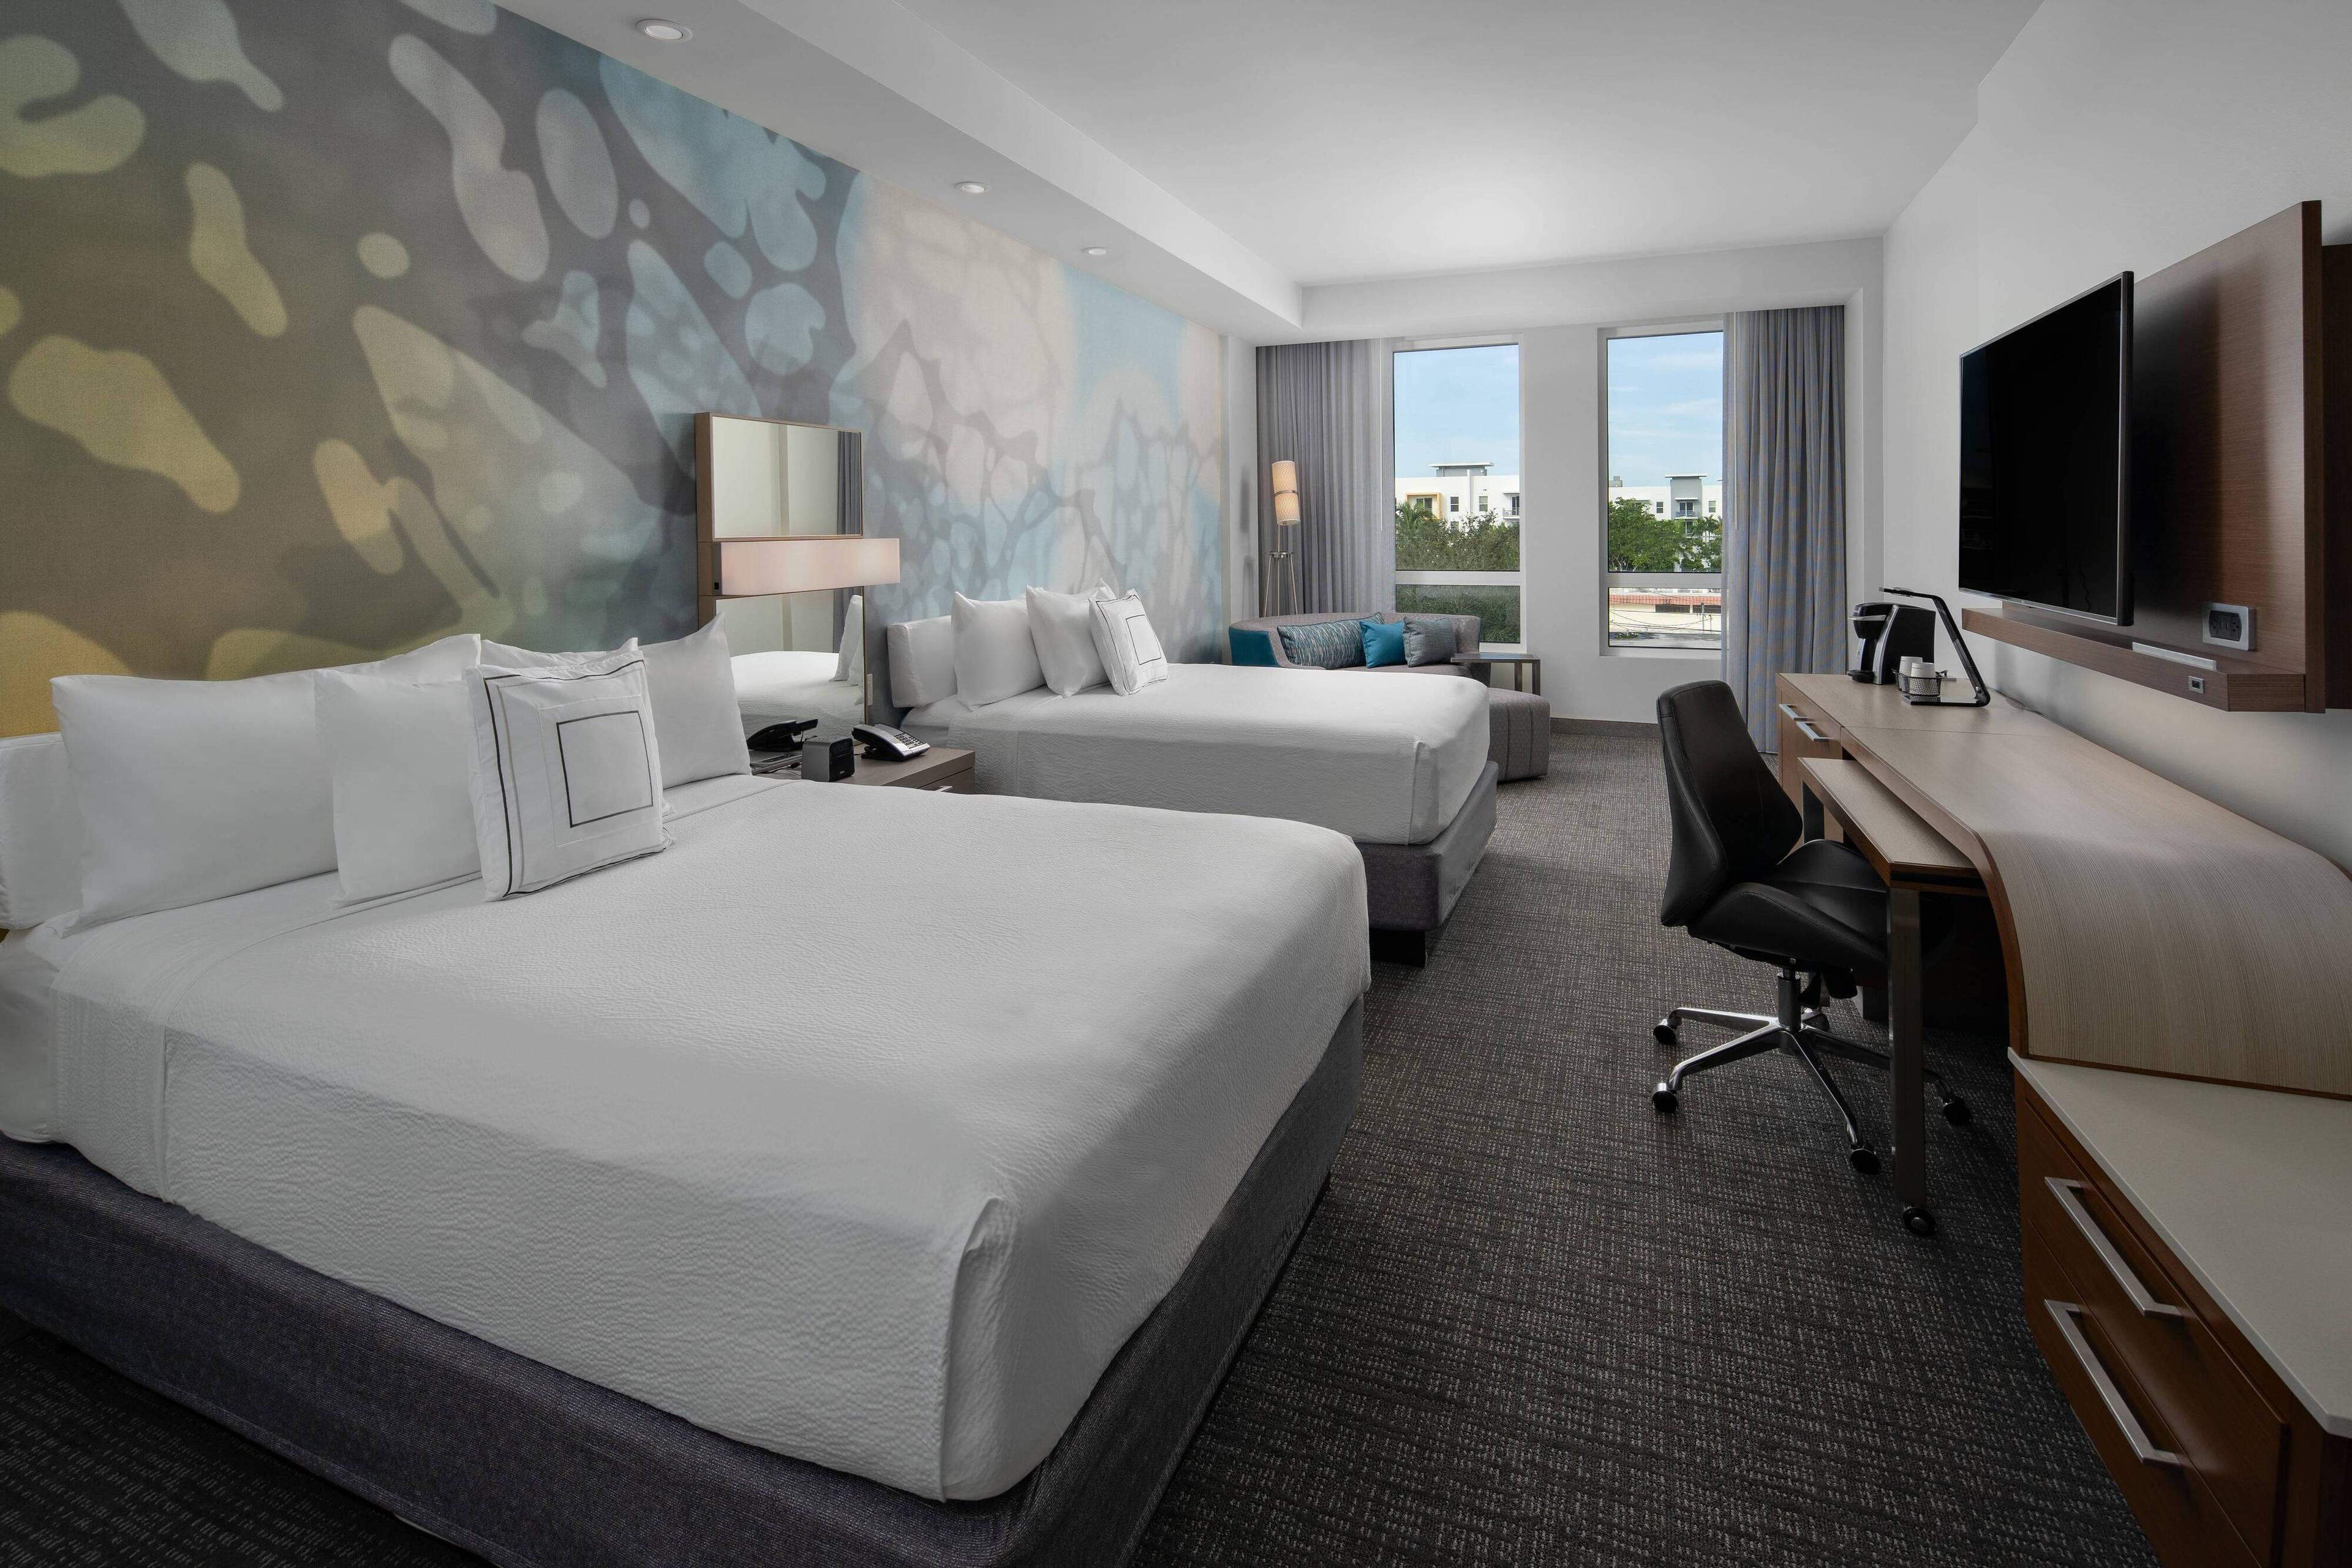 ad out in our spacious queen/queen hotel rooms in Delray Beach, Florida, featuring modern decor, plush beds, ergonomic workstations, flat-screen TVs and complimentary high-speed Wi-Fi.